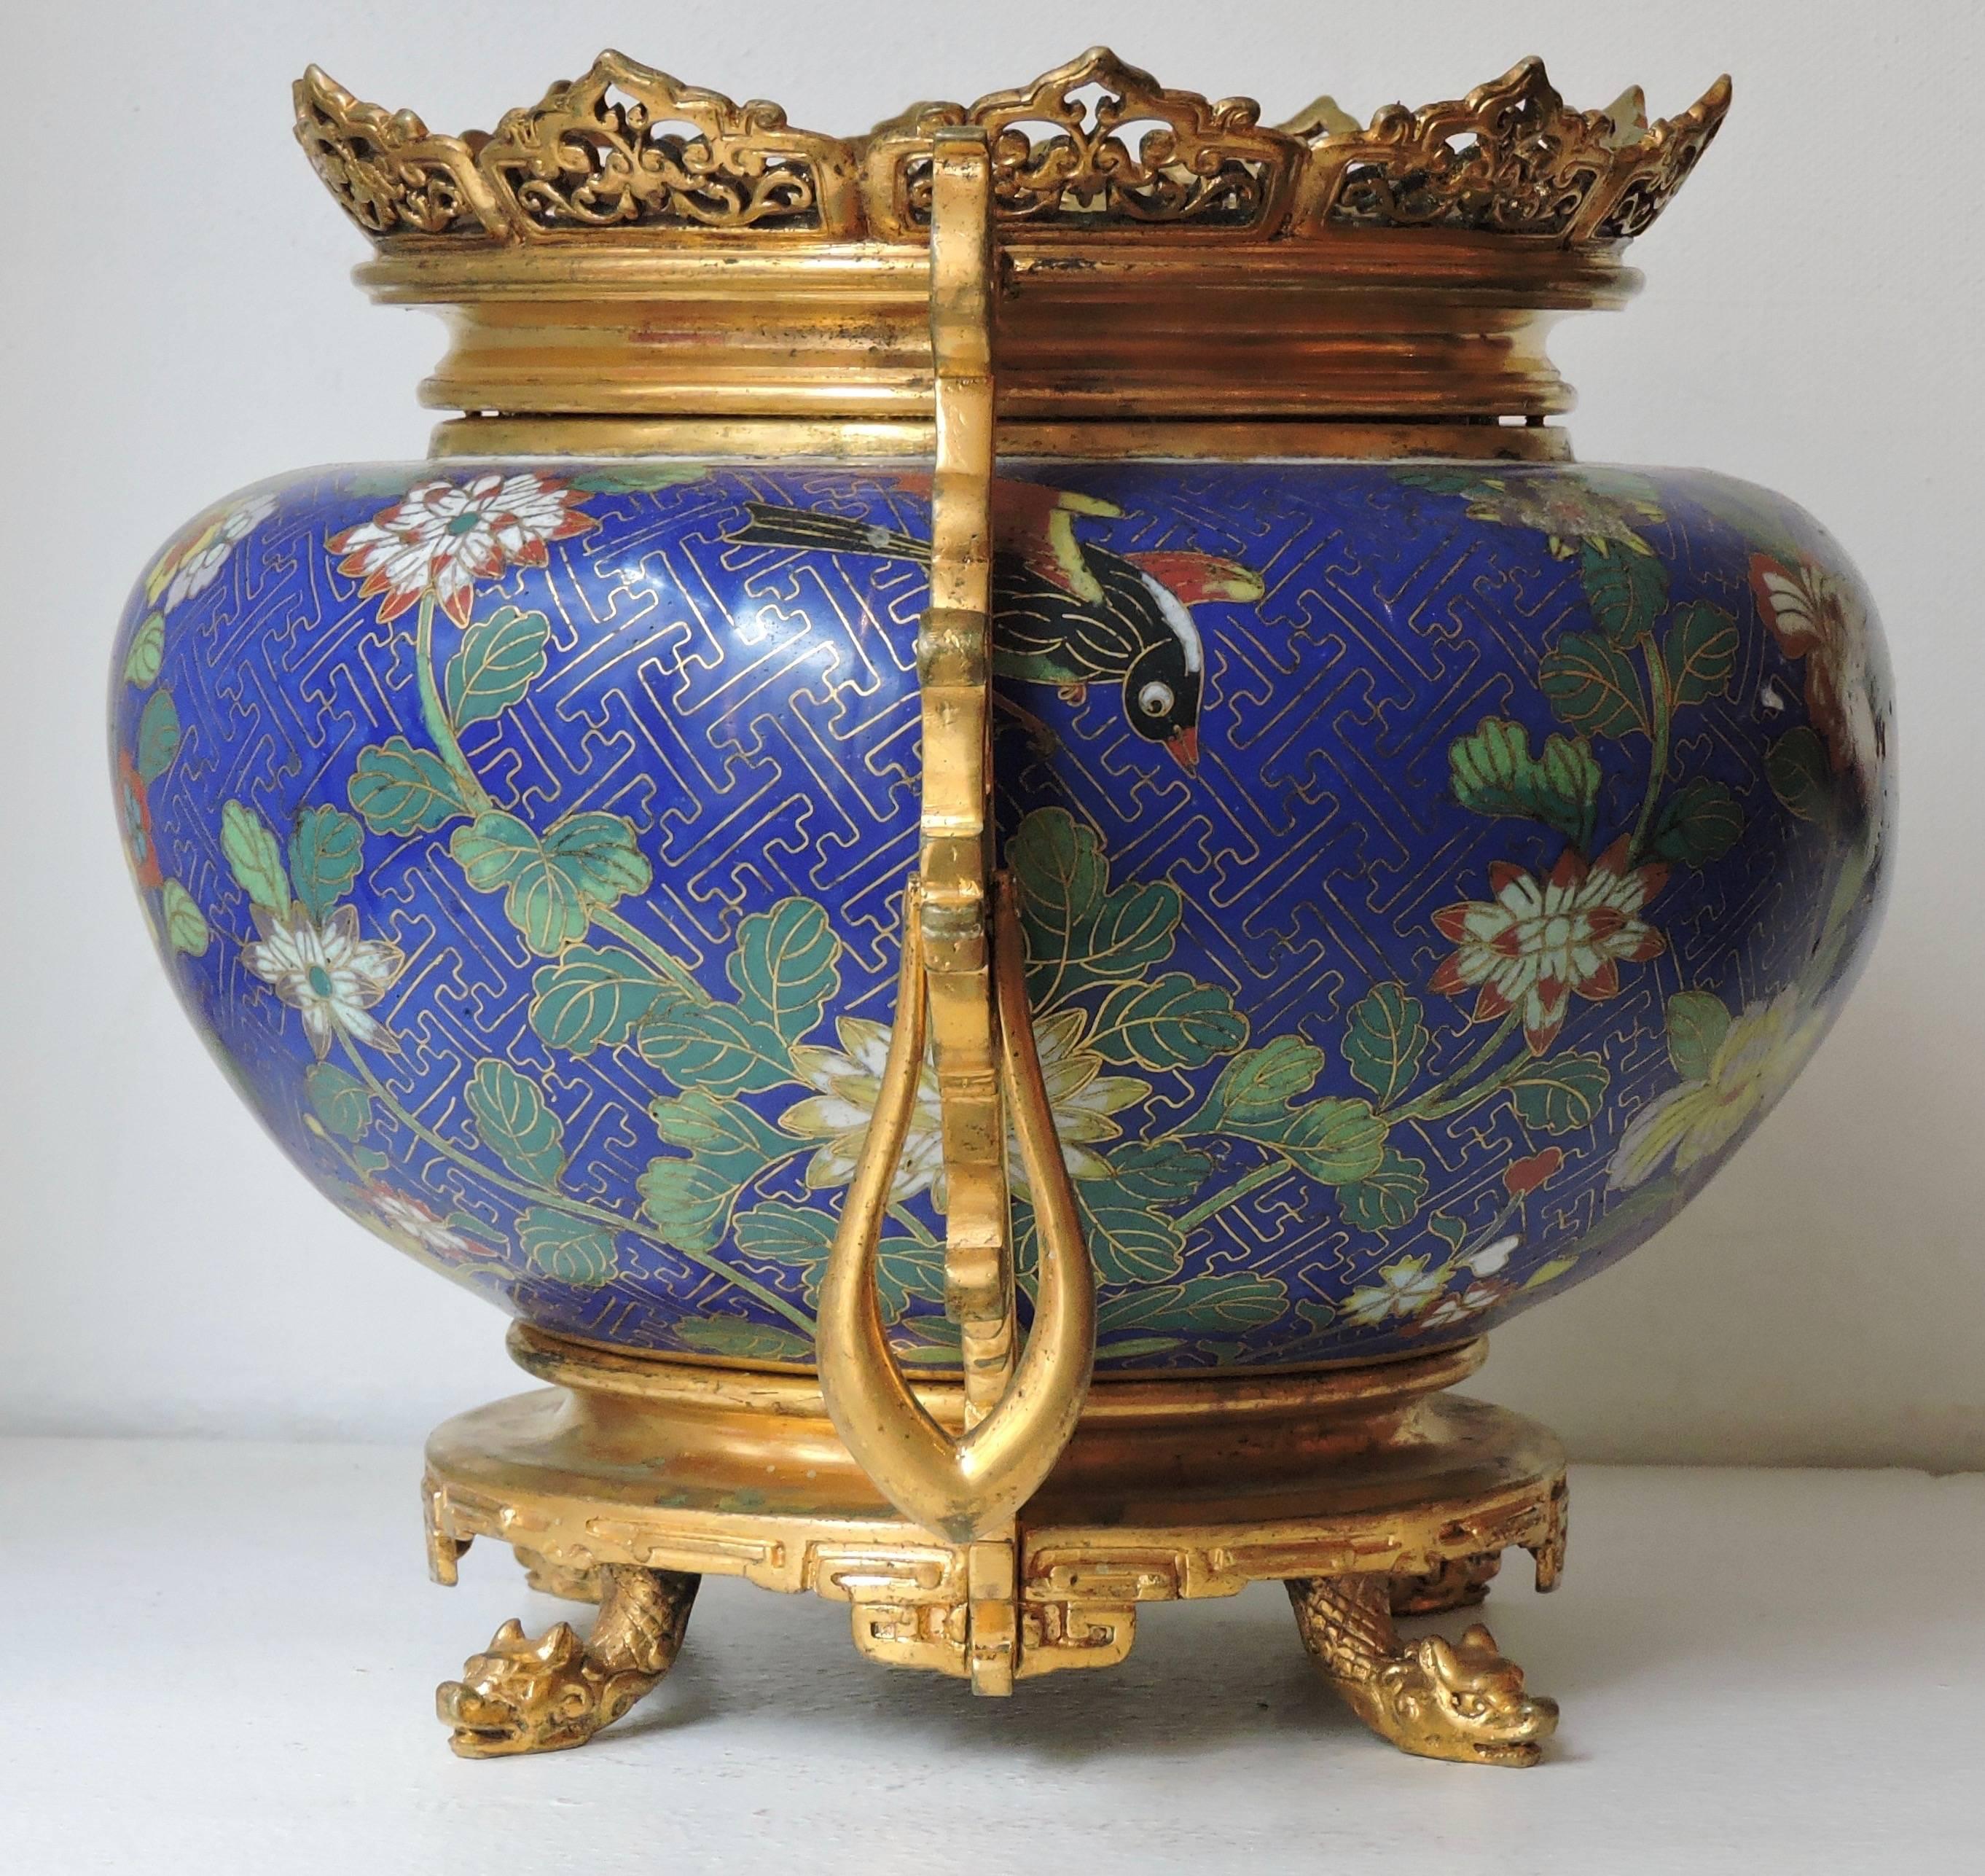 Late 19th Century French Chinoiserie Gilt Bronze-Mounted Cloisonné Enamel Centrepiece